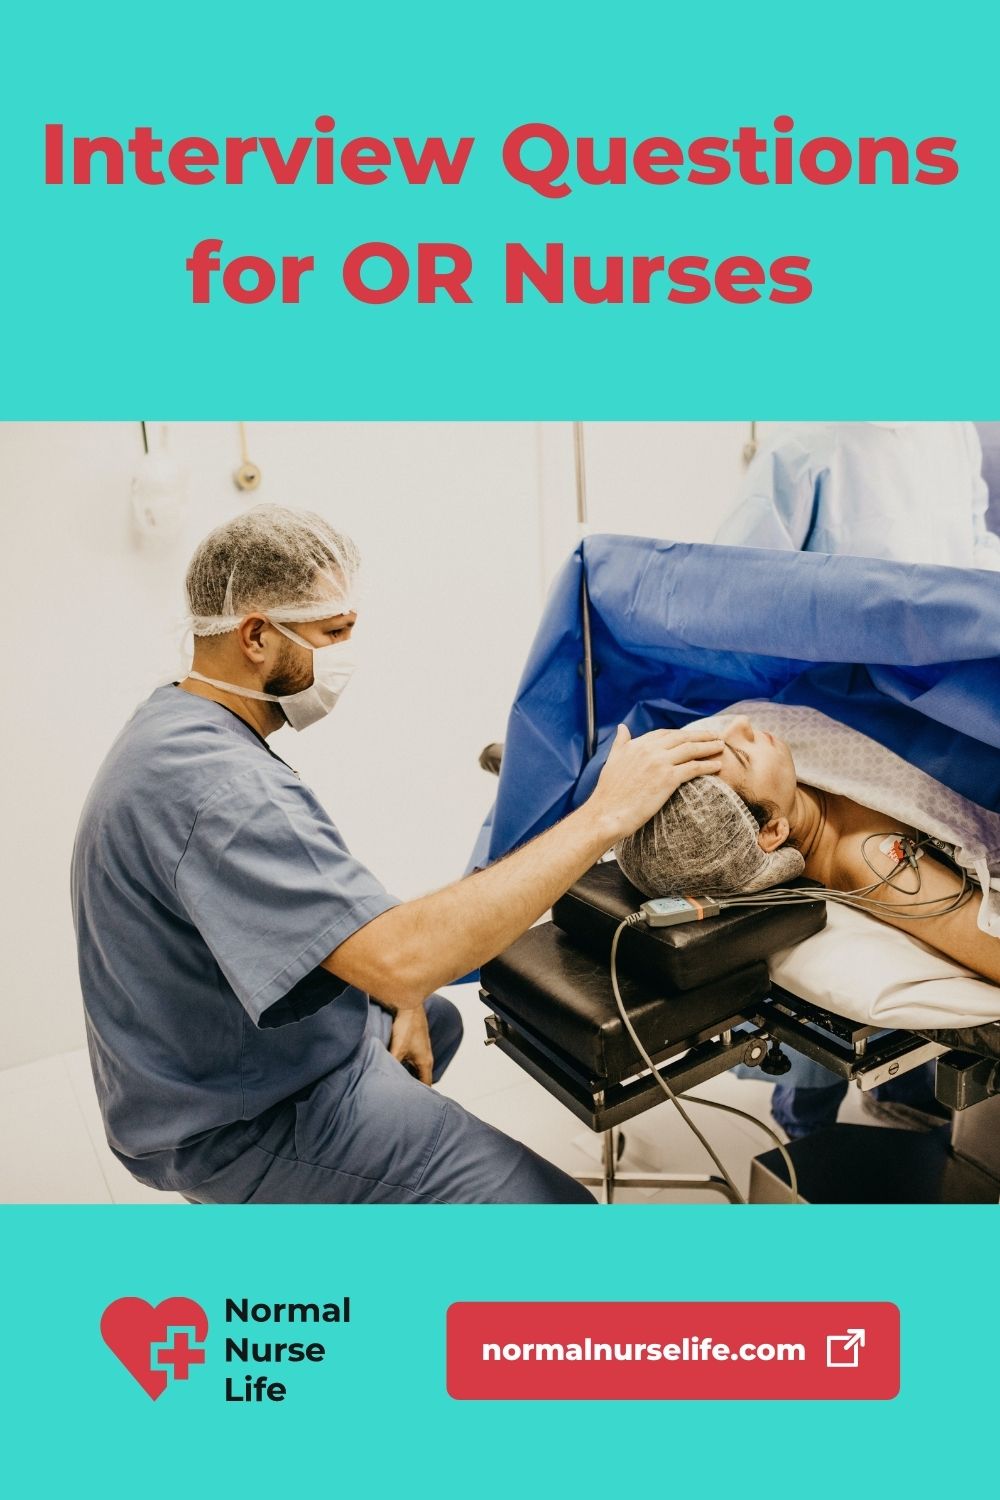 OR nurse interview questions